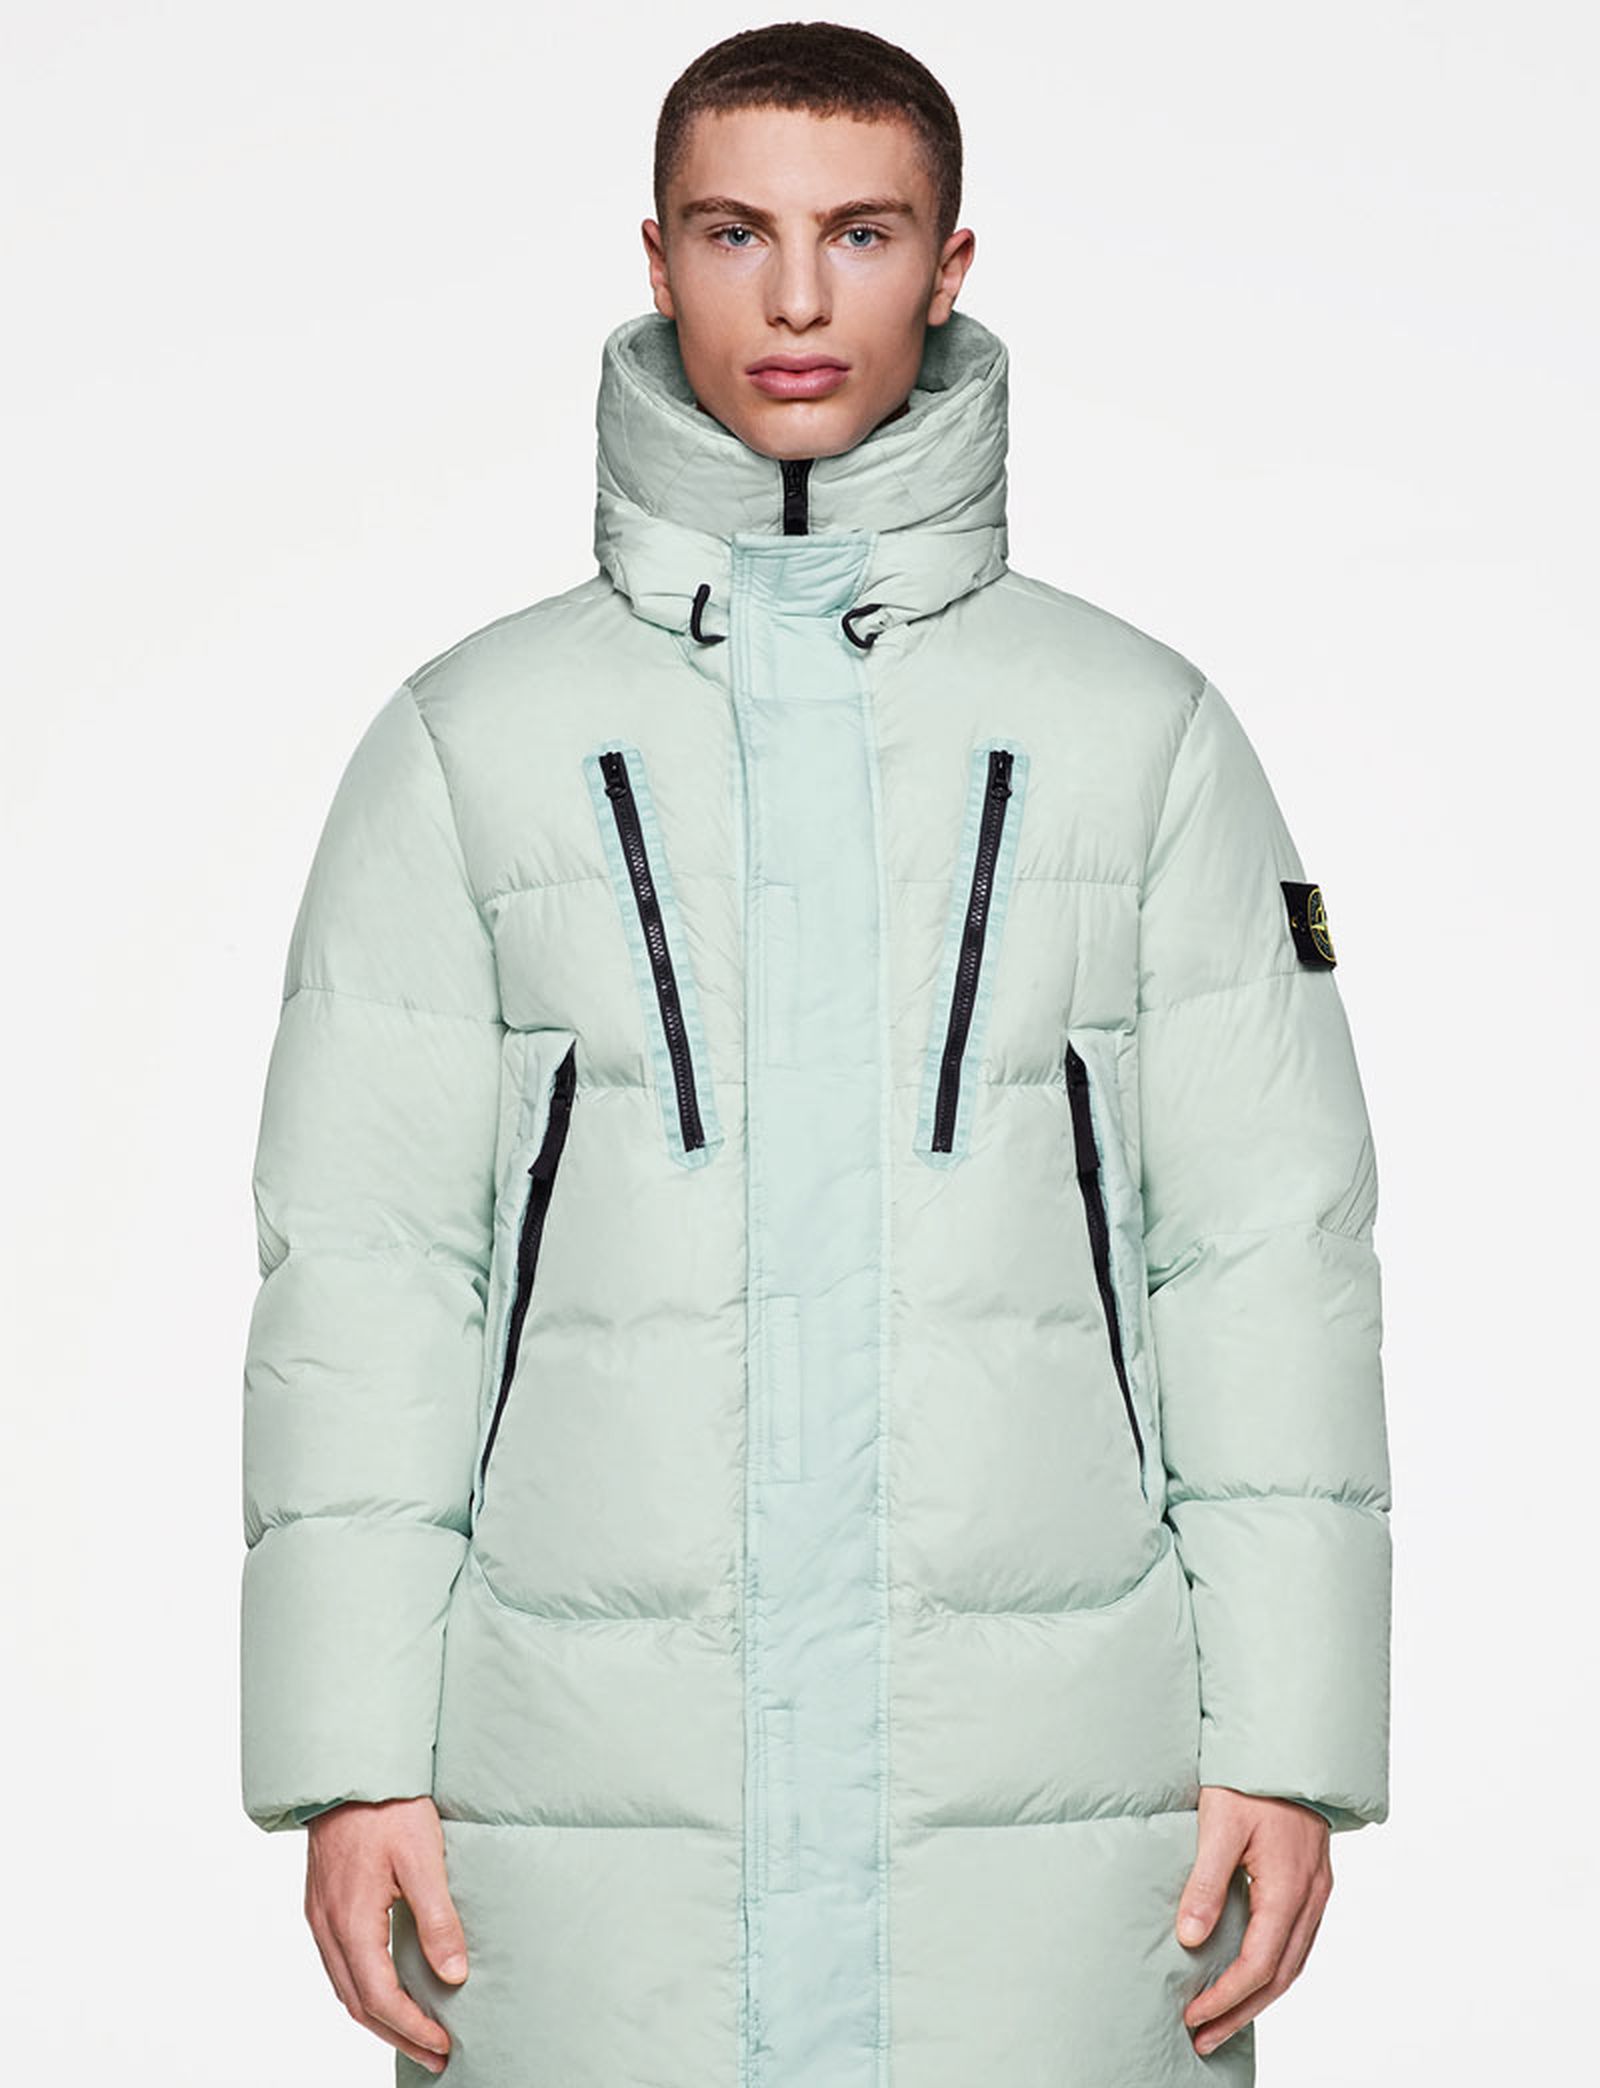 stone-island-fw21-icon-imagery-collection-11